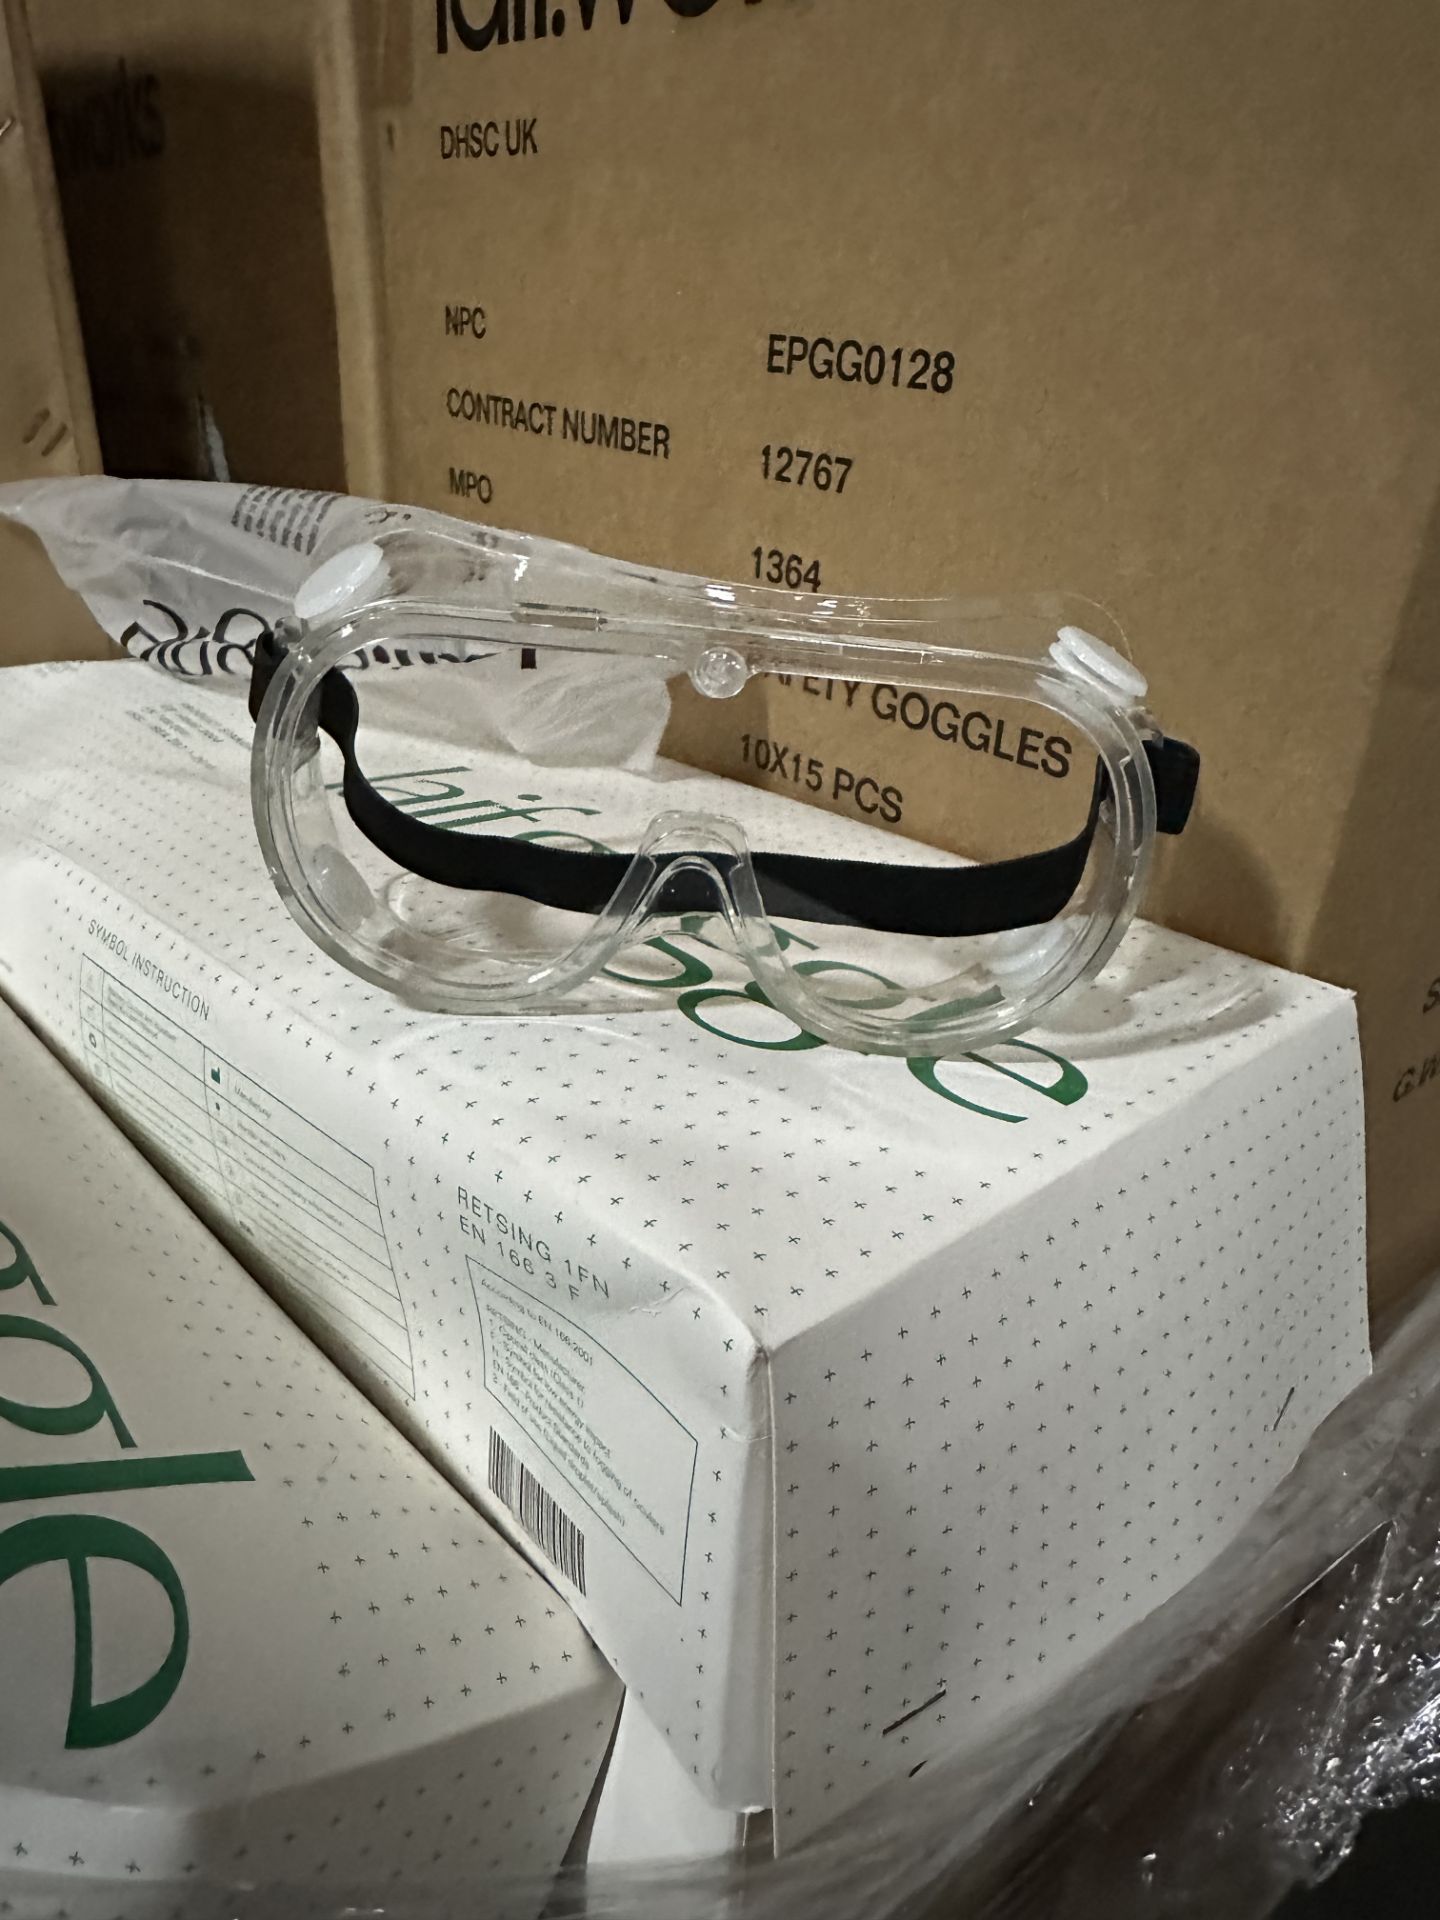 SAFETY GOGGLES 2400 PAIRS BRAND NEW - Image 3 of 3